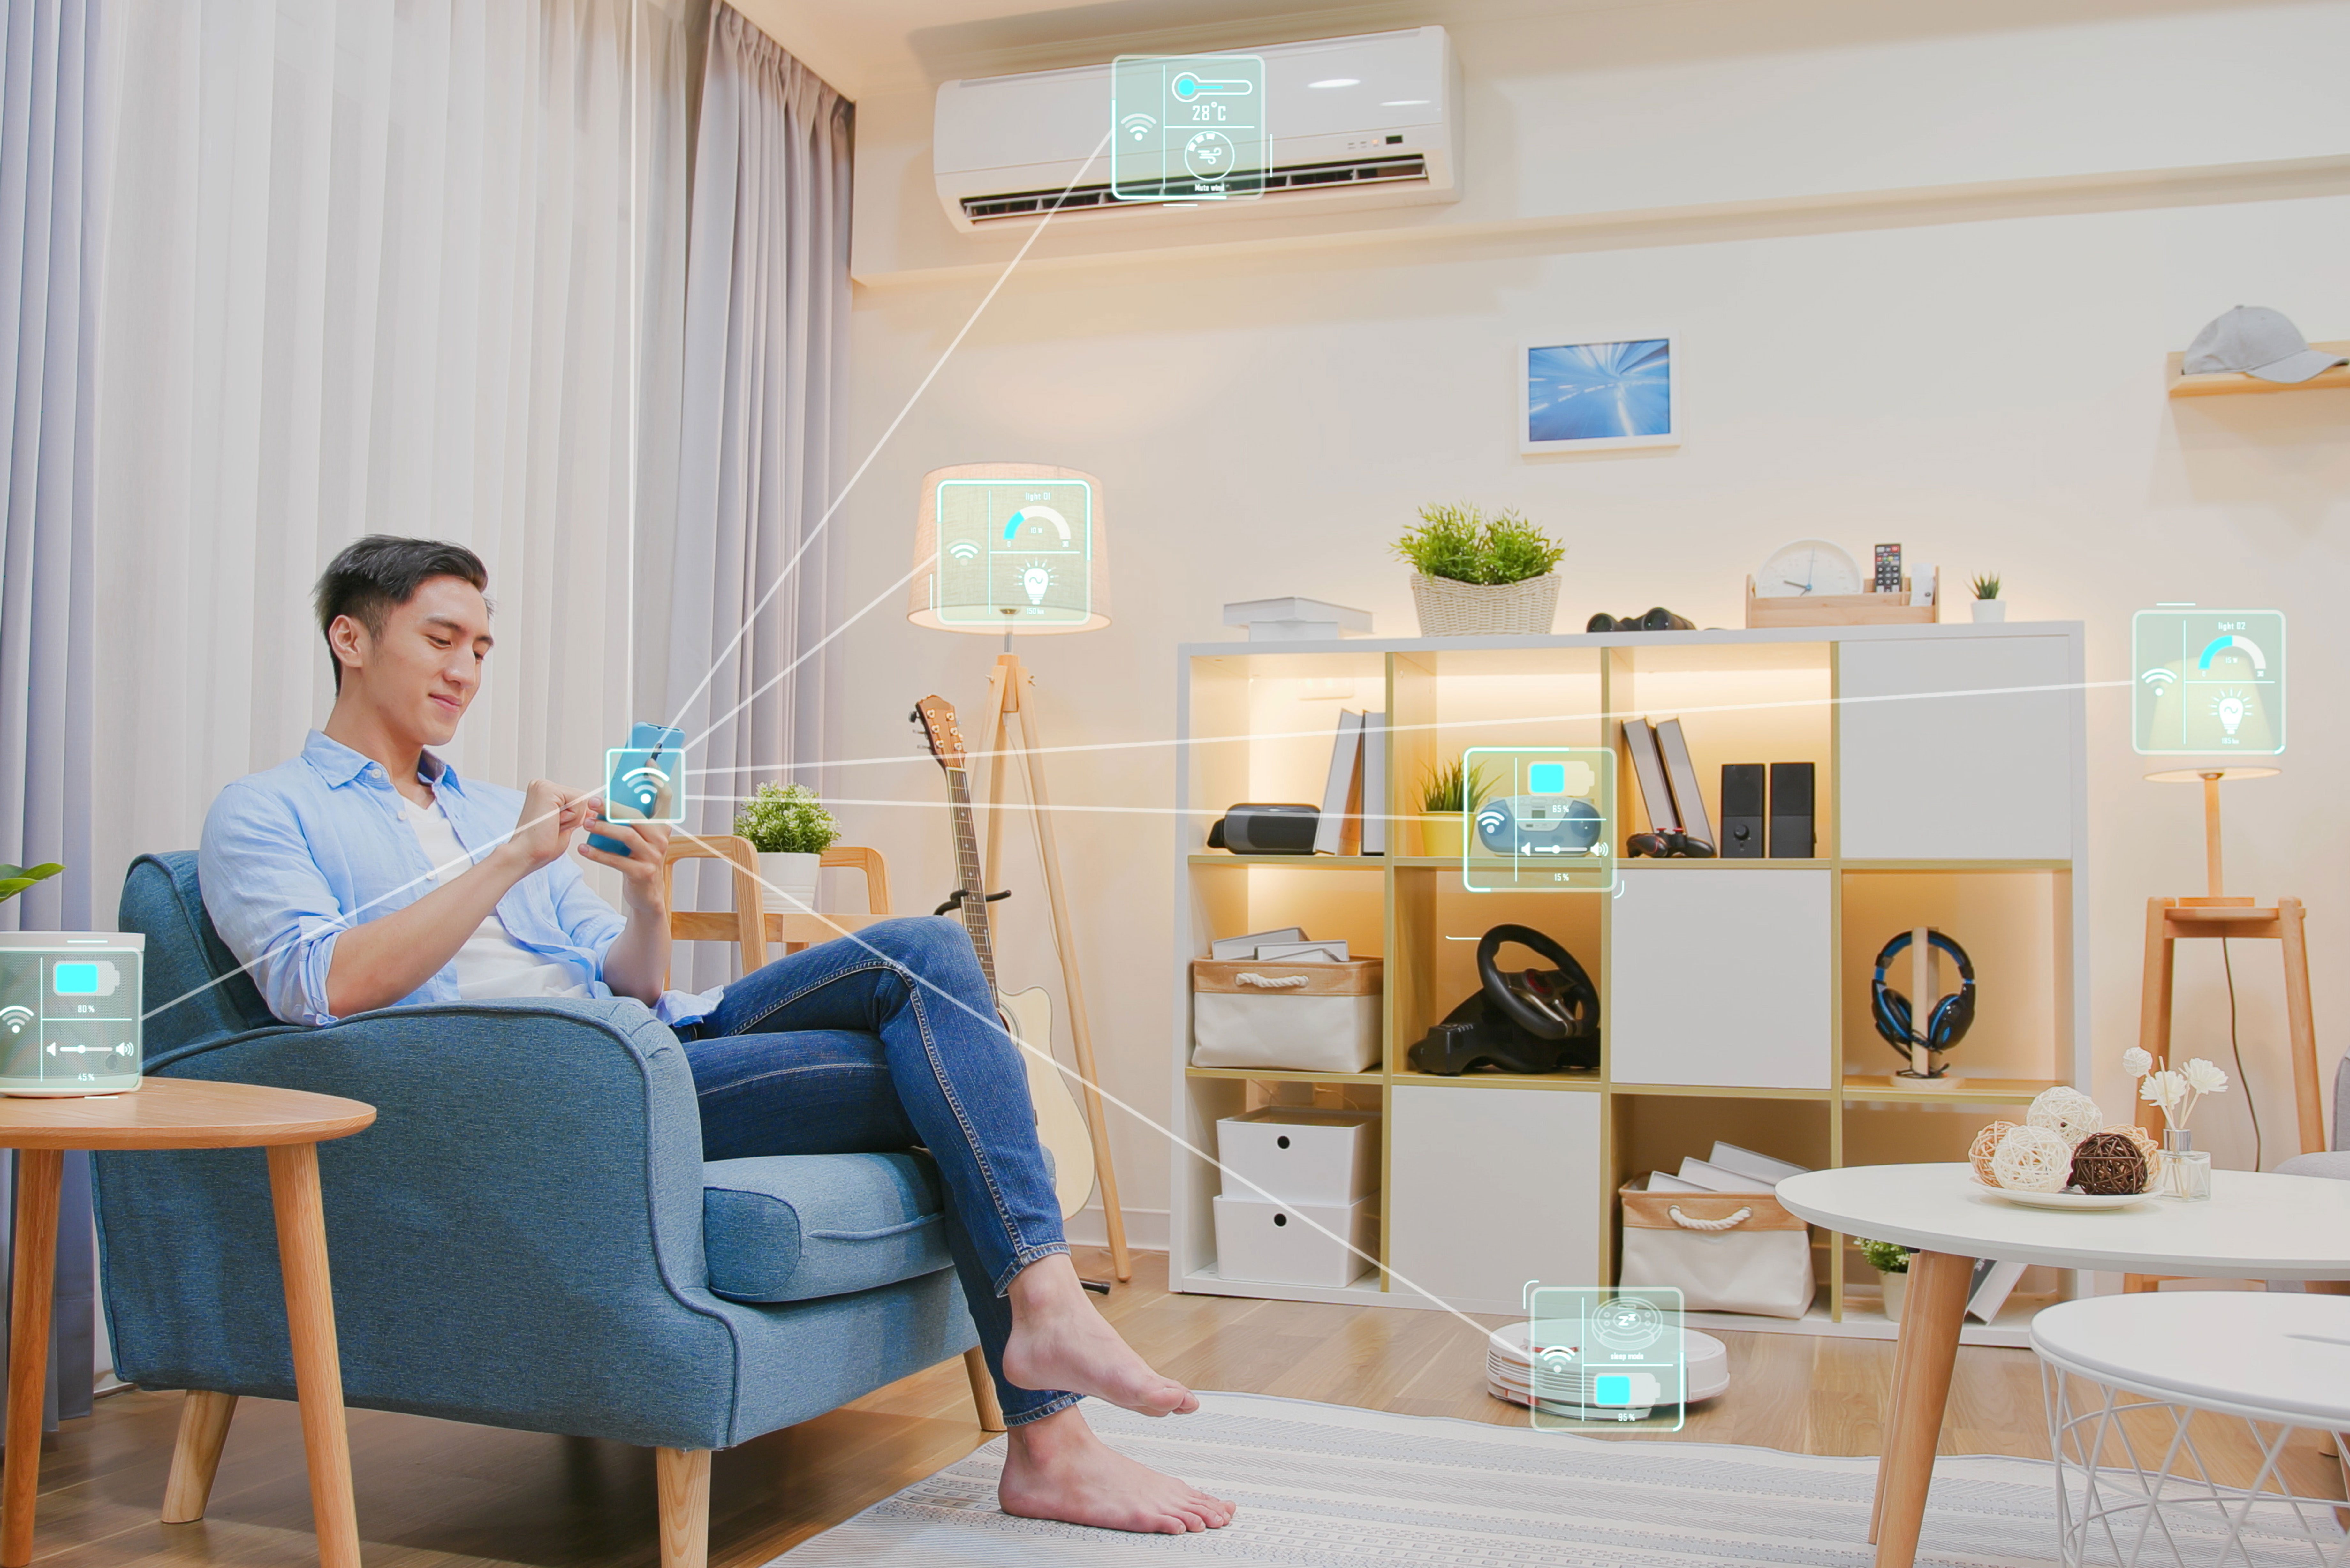 IoT enabled connectivity in a Smart home